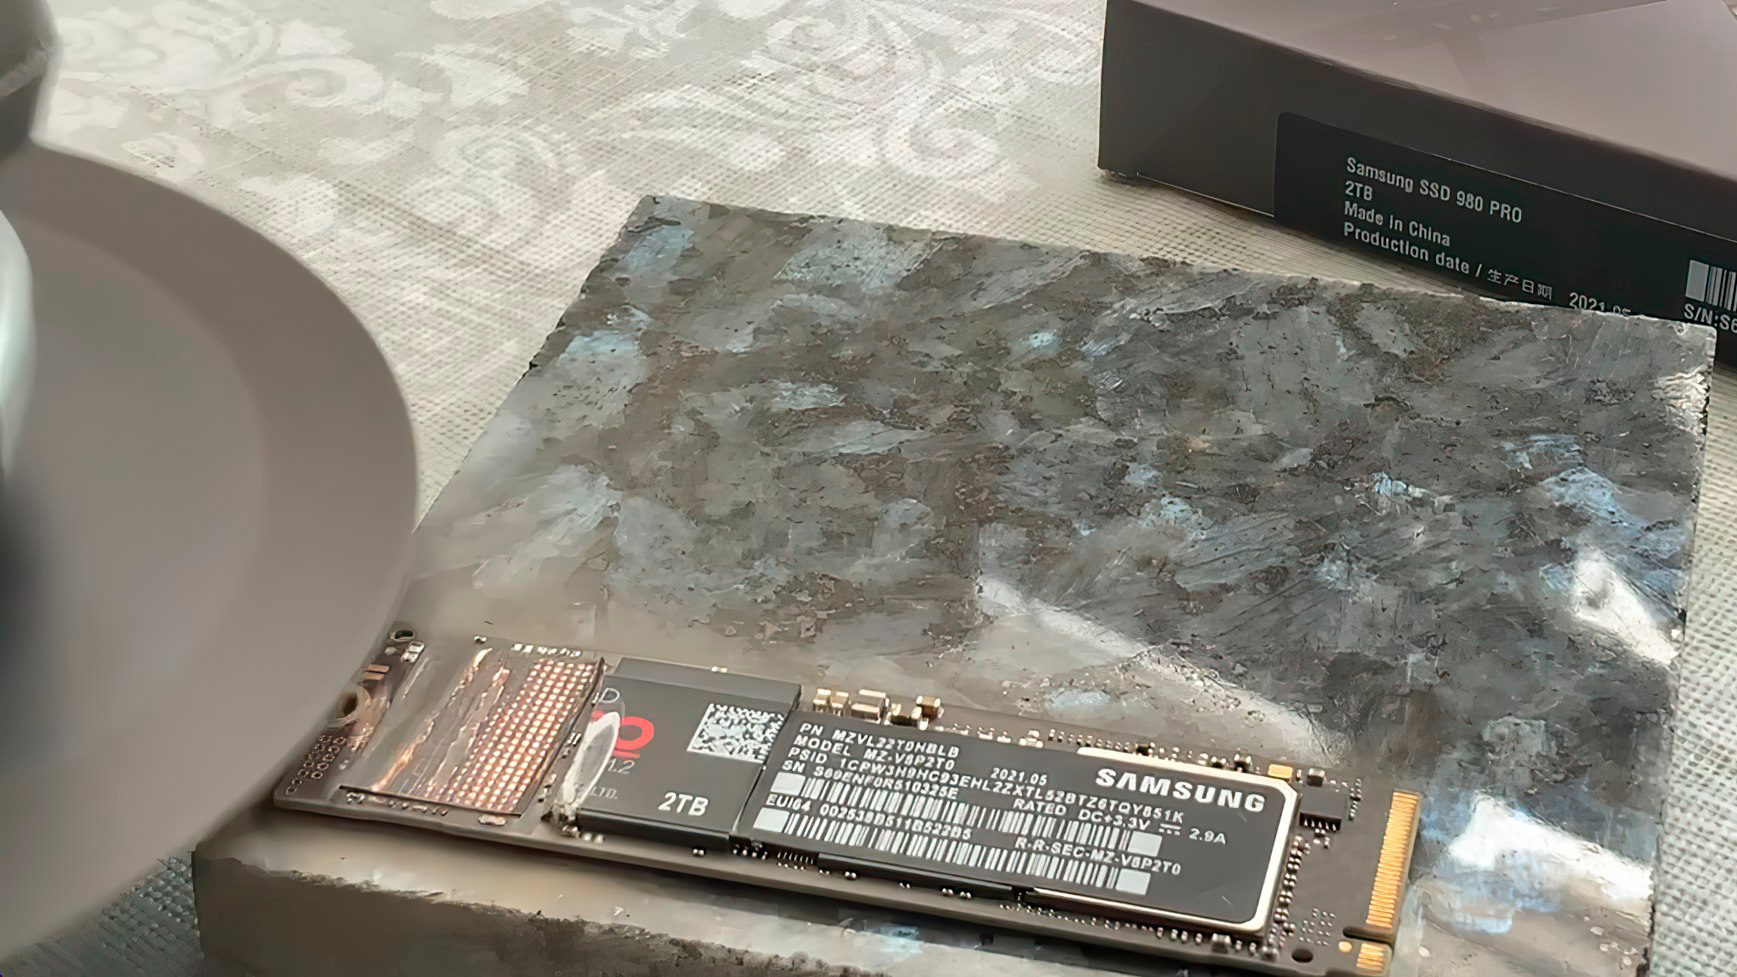 Samsung Germany RMA Suggests Drilling or Smashing The SSD With Hammer | Tom's Hardware